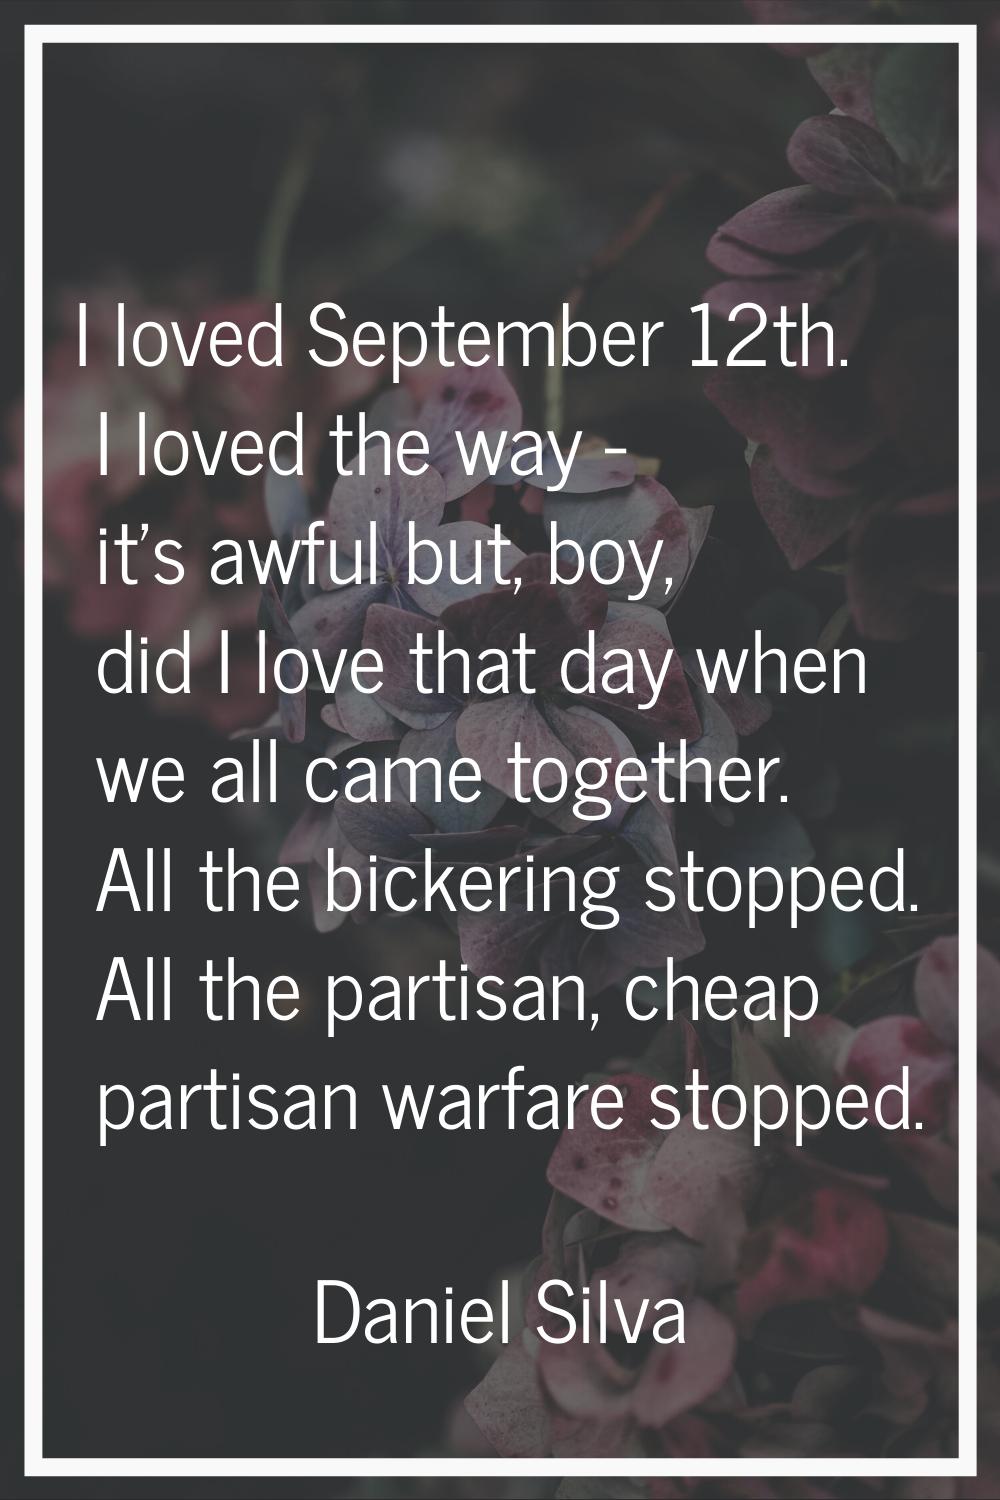 I loved September 12th. I loved the way - it's awful but, boy, did I love that day when we all came